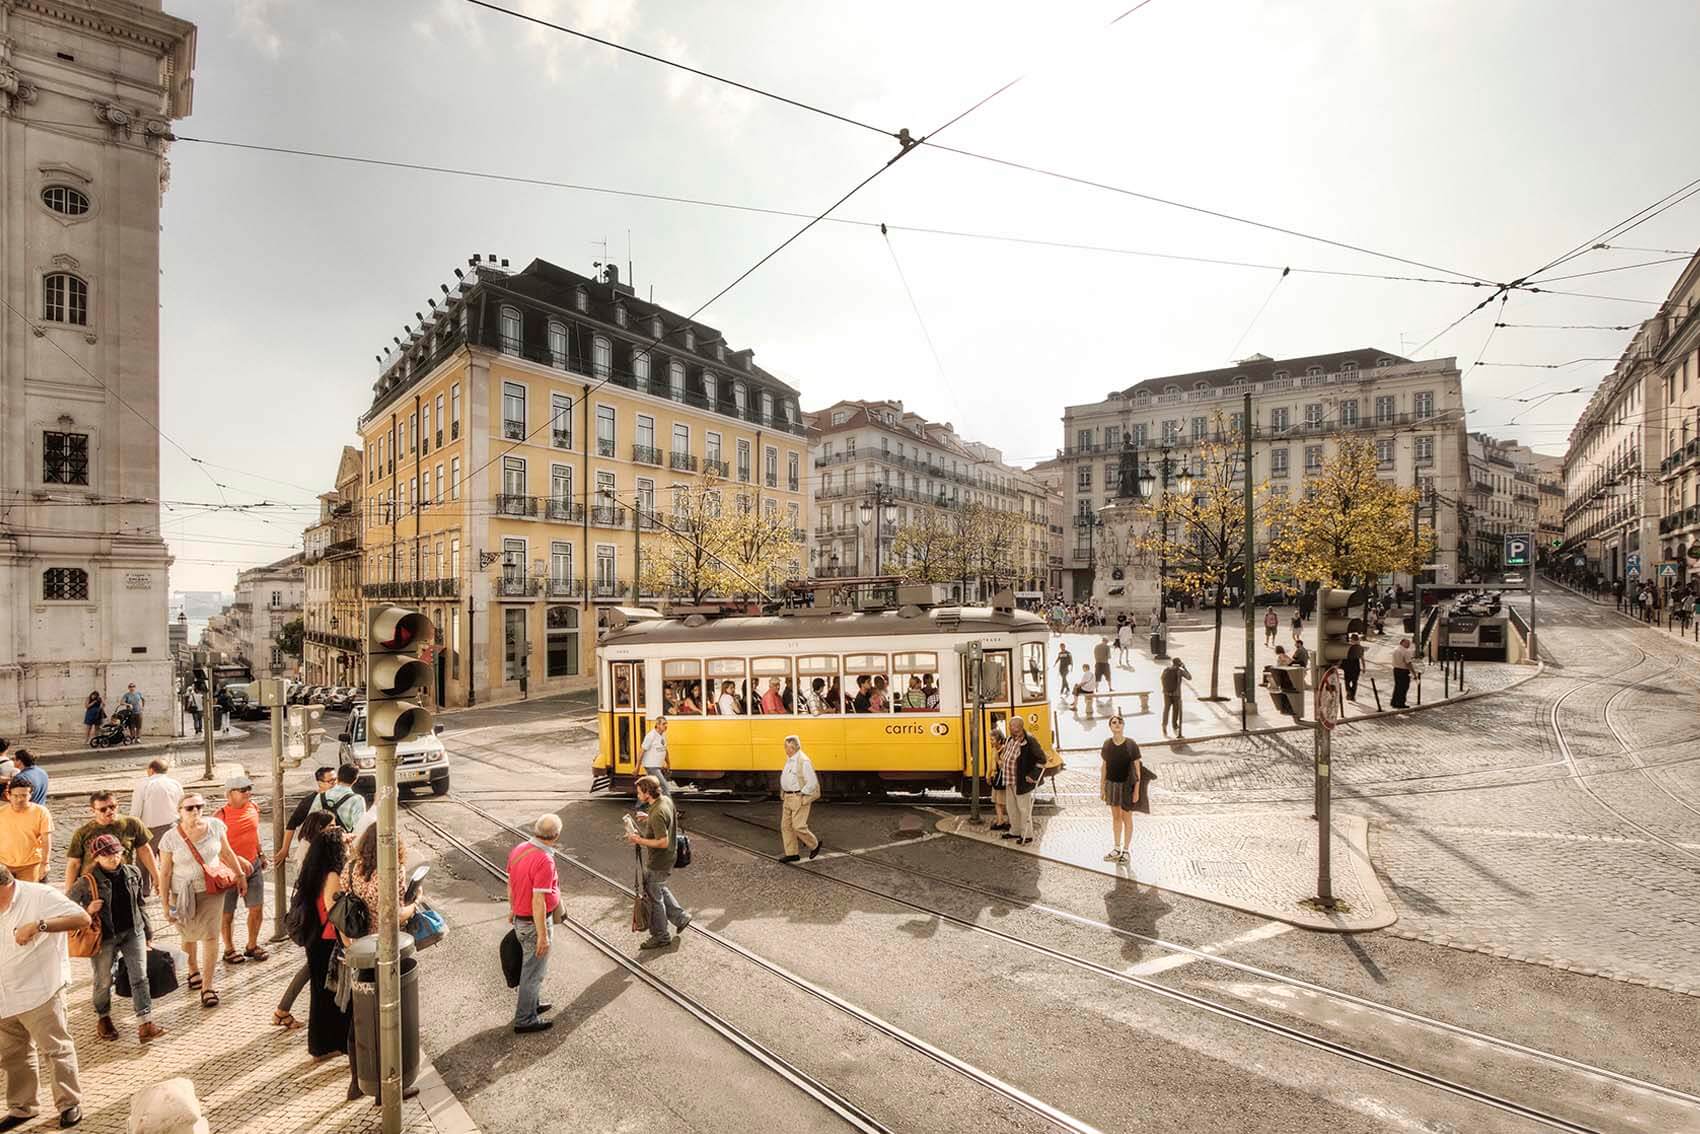 People crossing the street with a yellow tram train in the background in Lisbon, Portugal